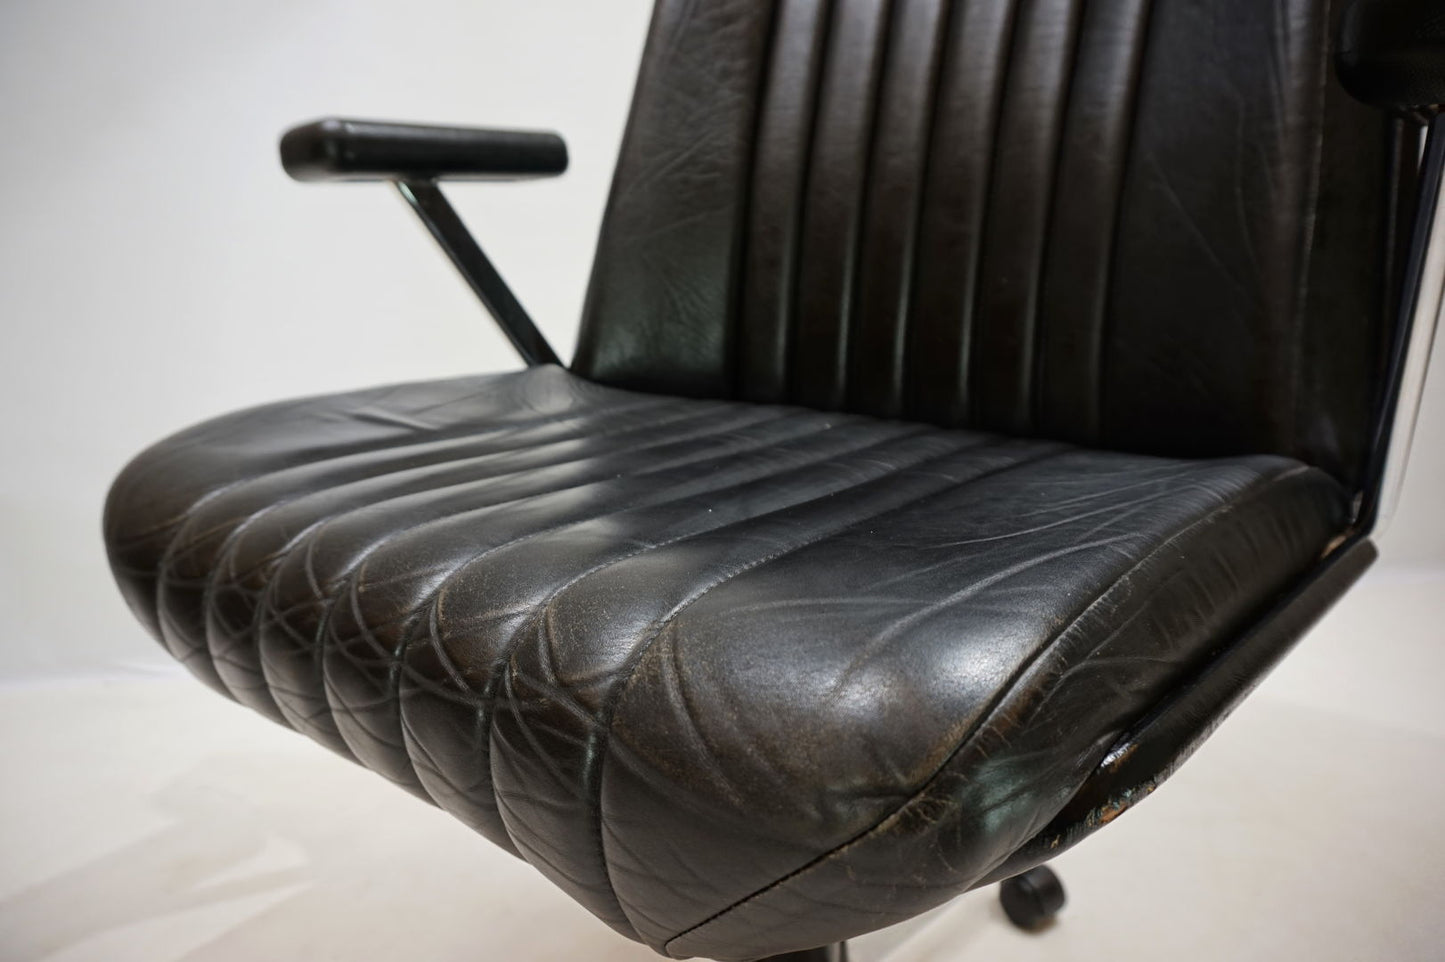 Stoll Giroflex 7014 leather office chair